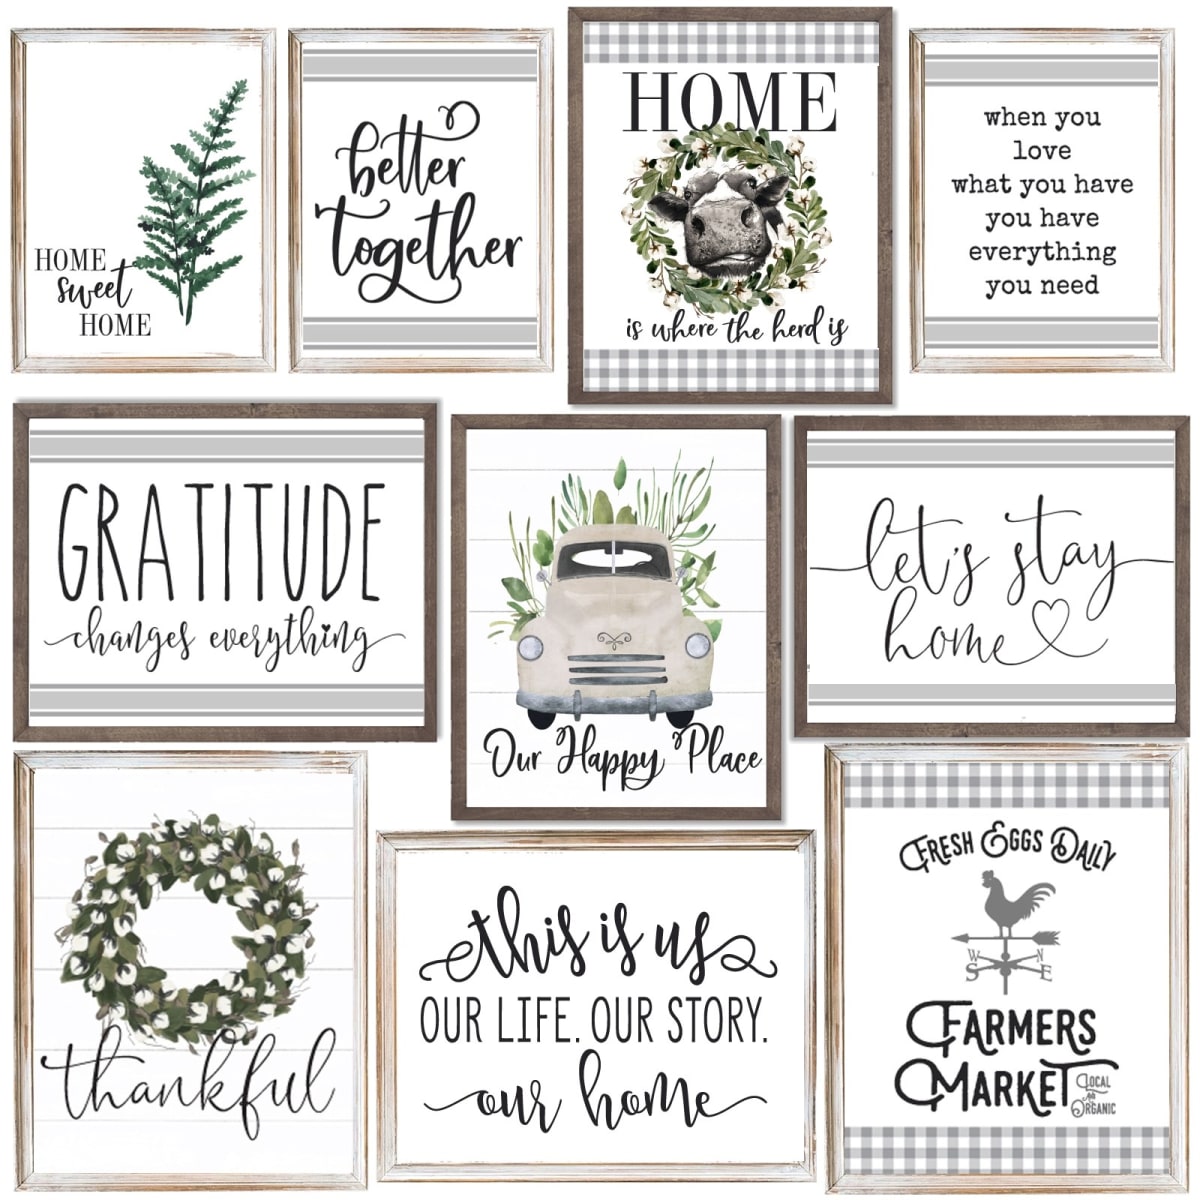 Large Home Prints – Only $3.87!